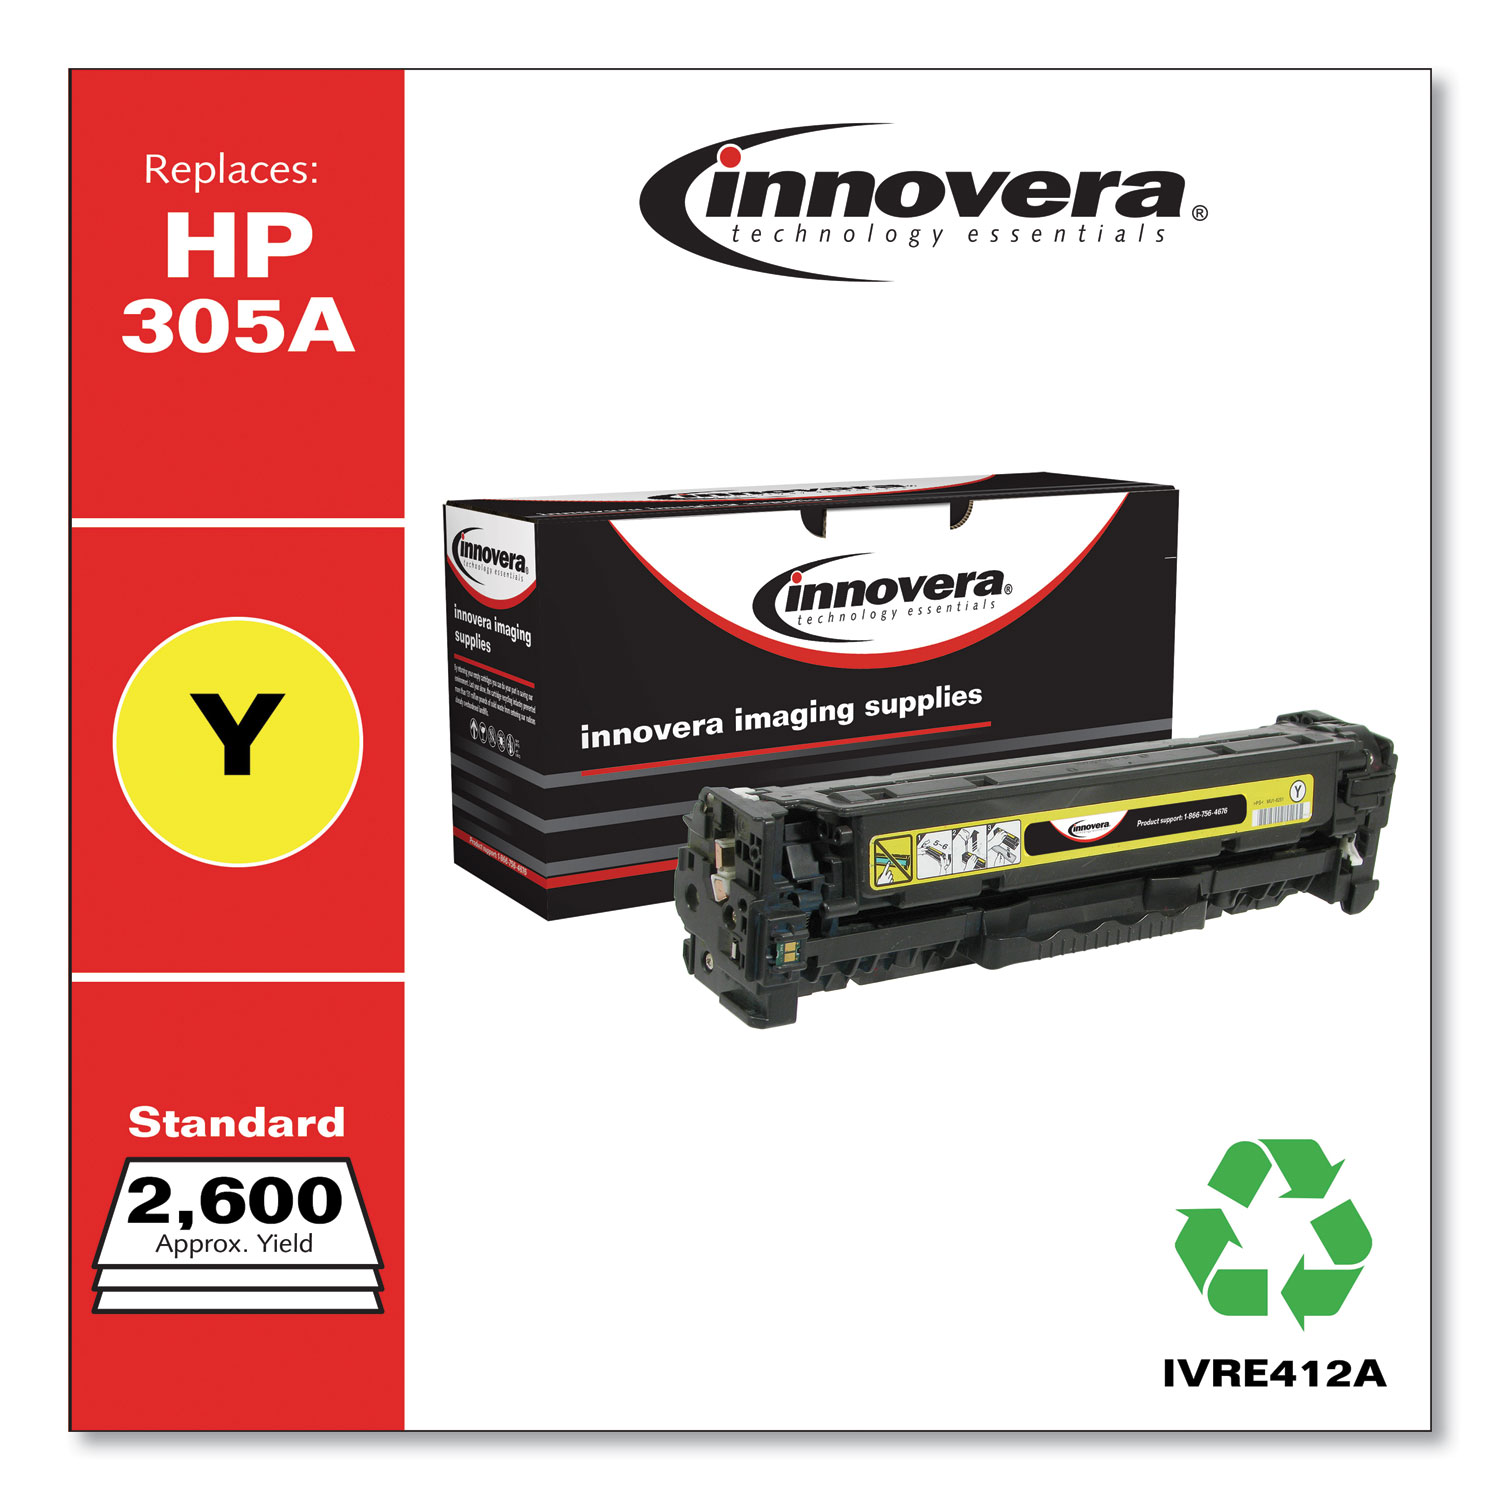  Innovera IVRE412A Remanufactured CE412A (305A) Toner, 2600 Page-Yield, Yellow (IVRE412A) 